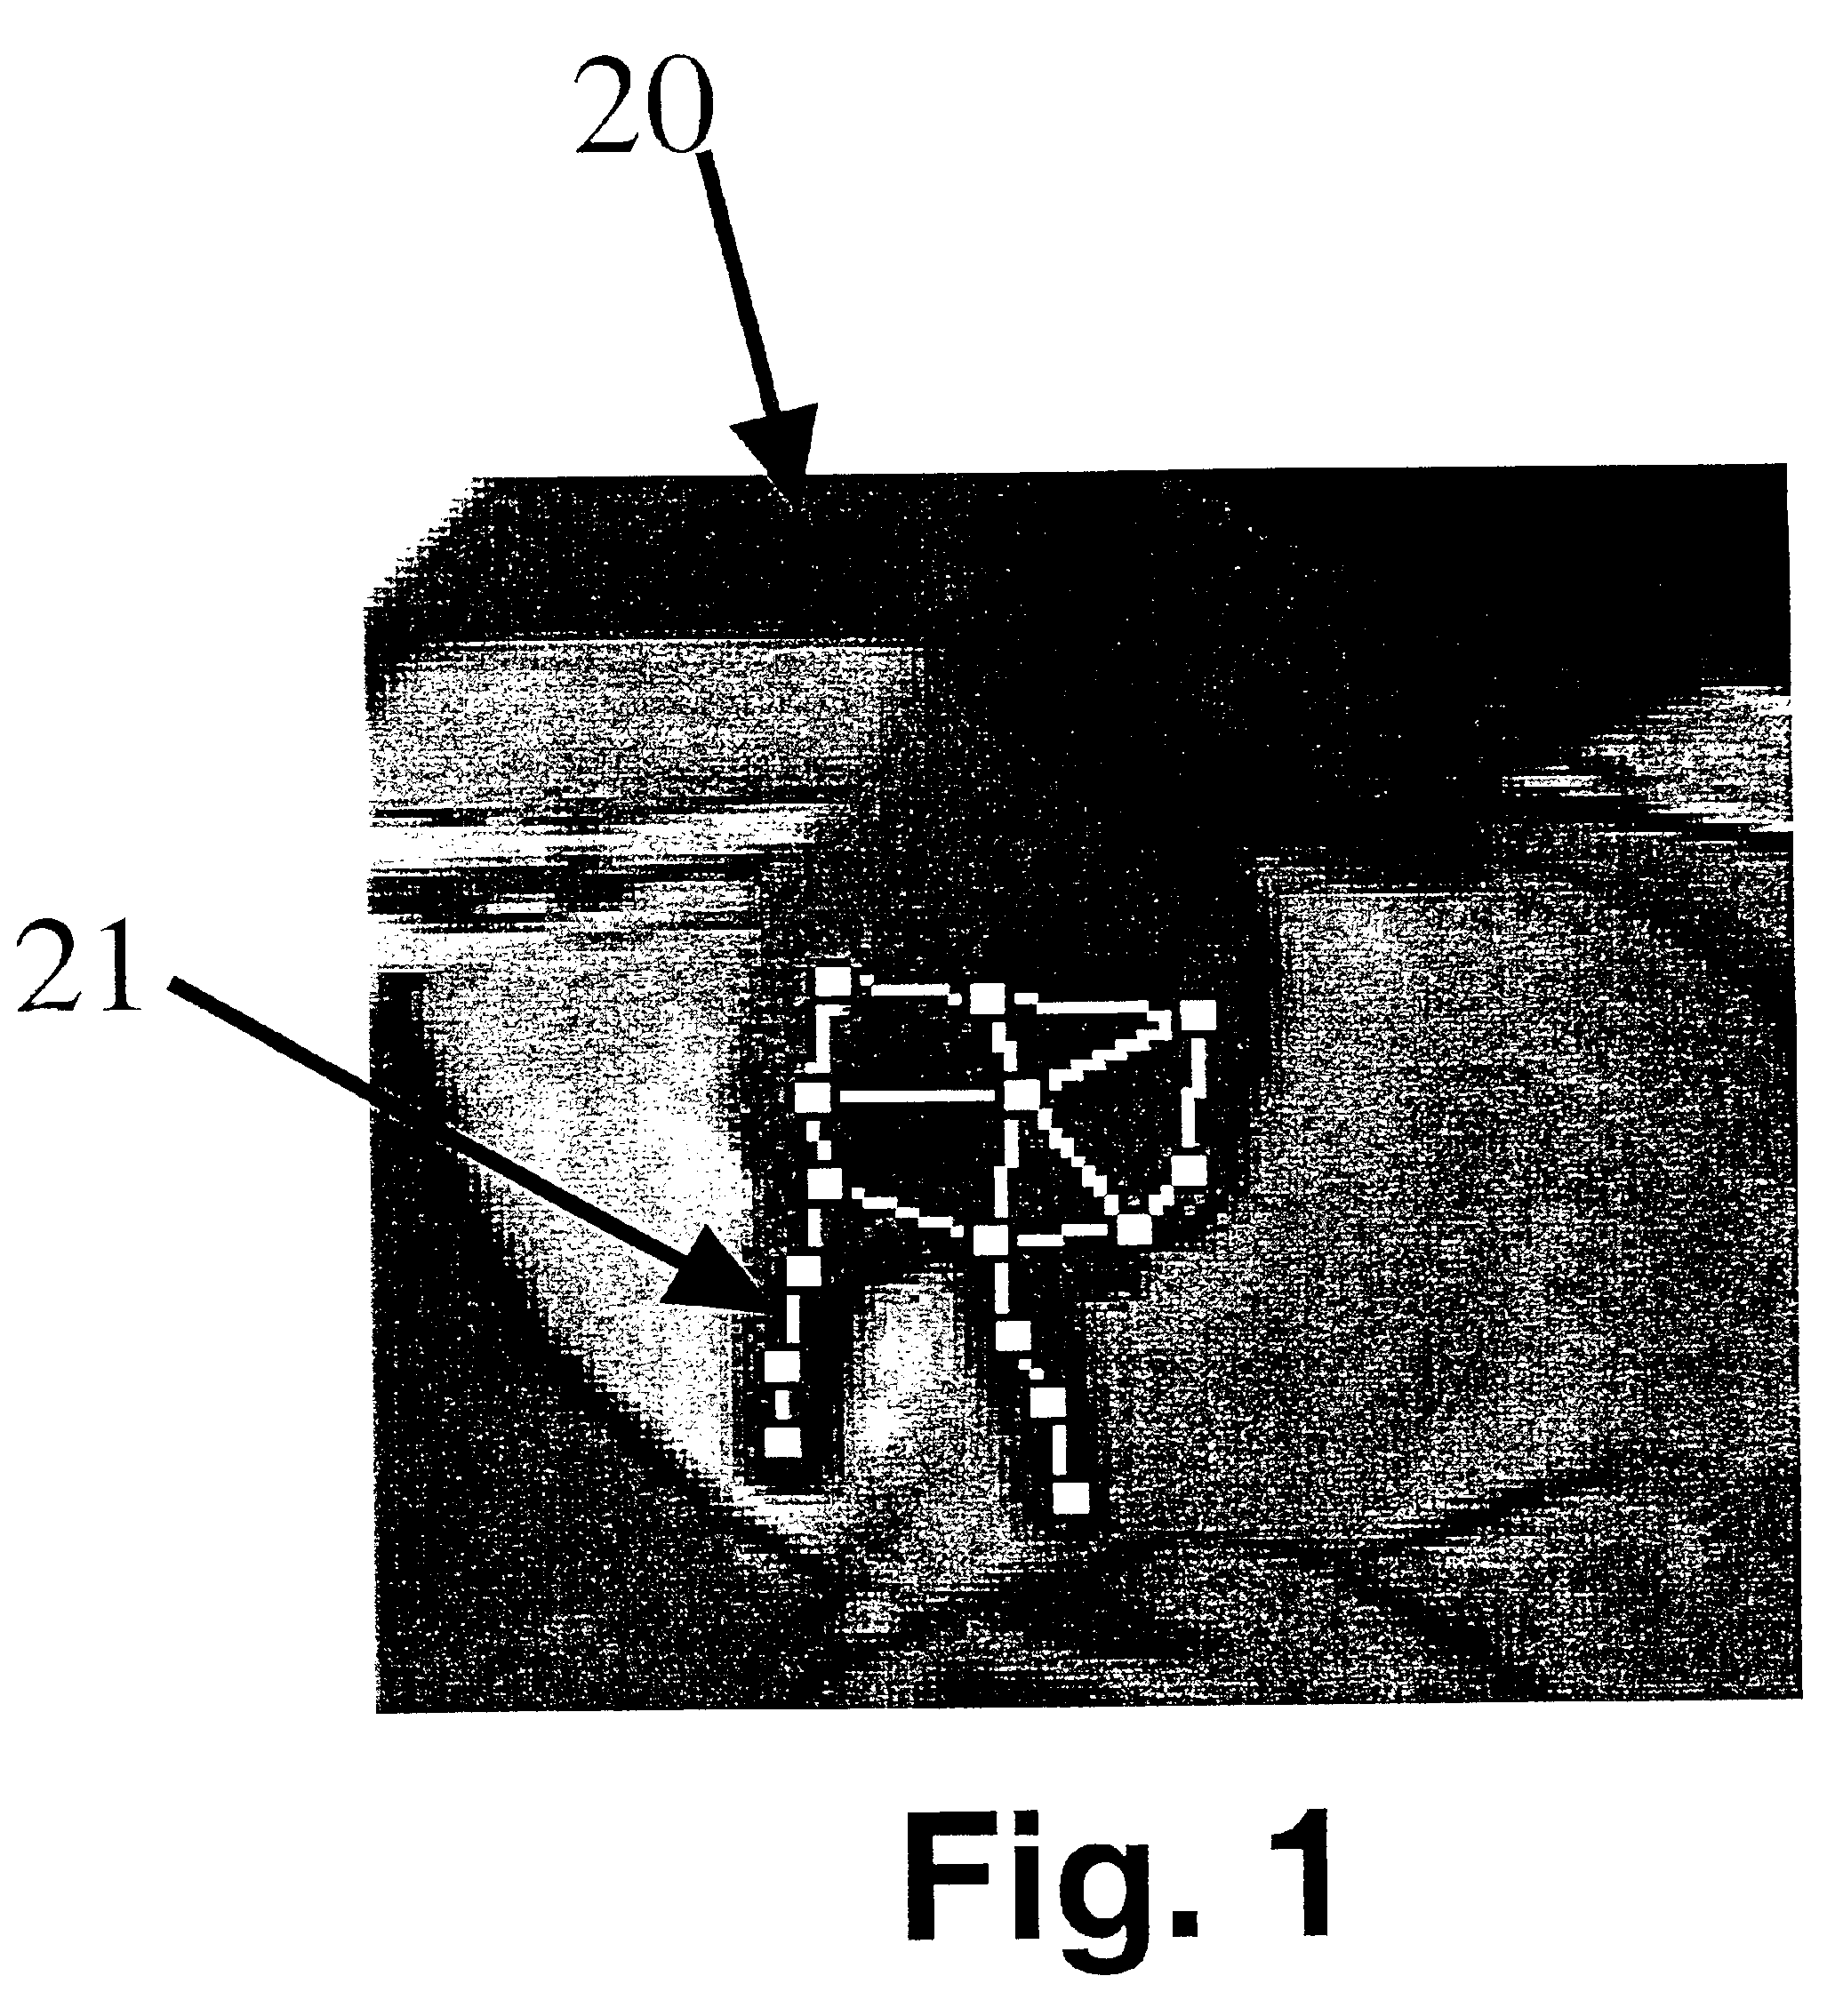 Method for recognizing objects in digitized images